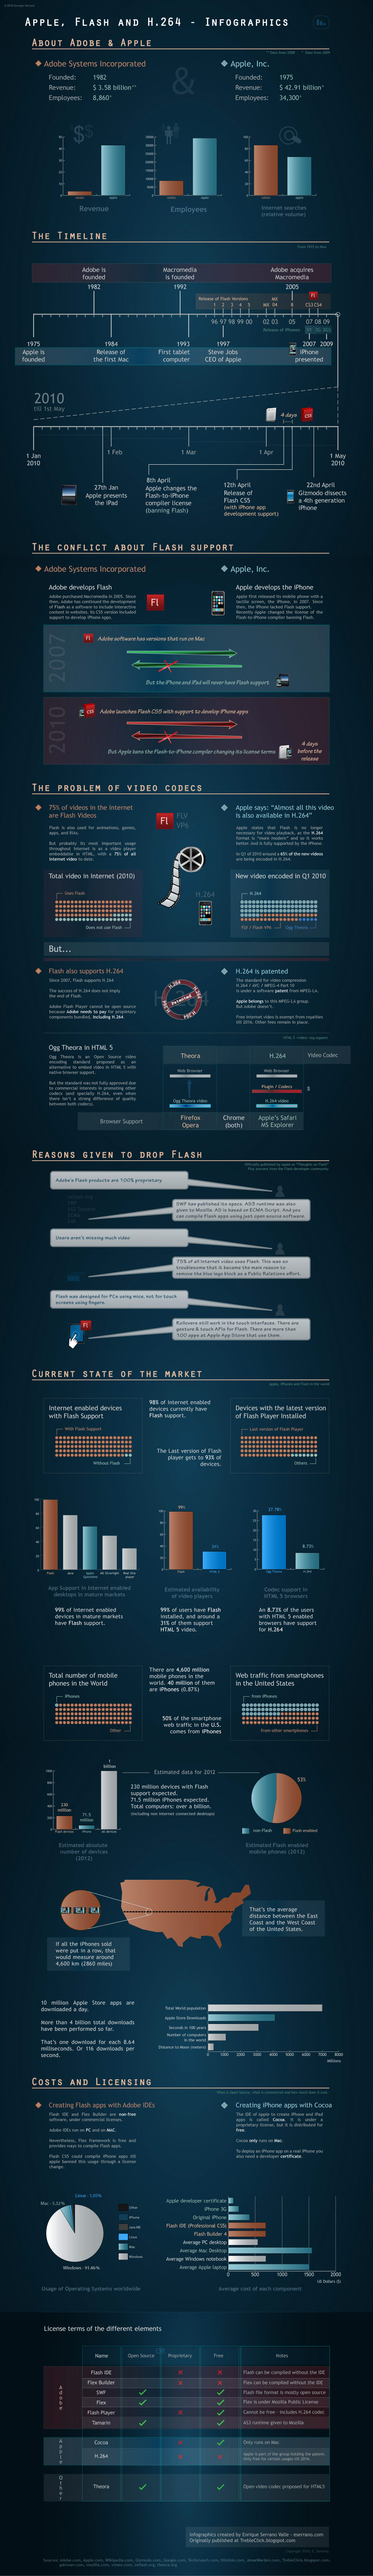 Apple and Adobe infographics